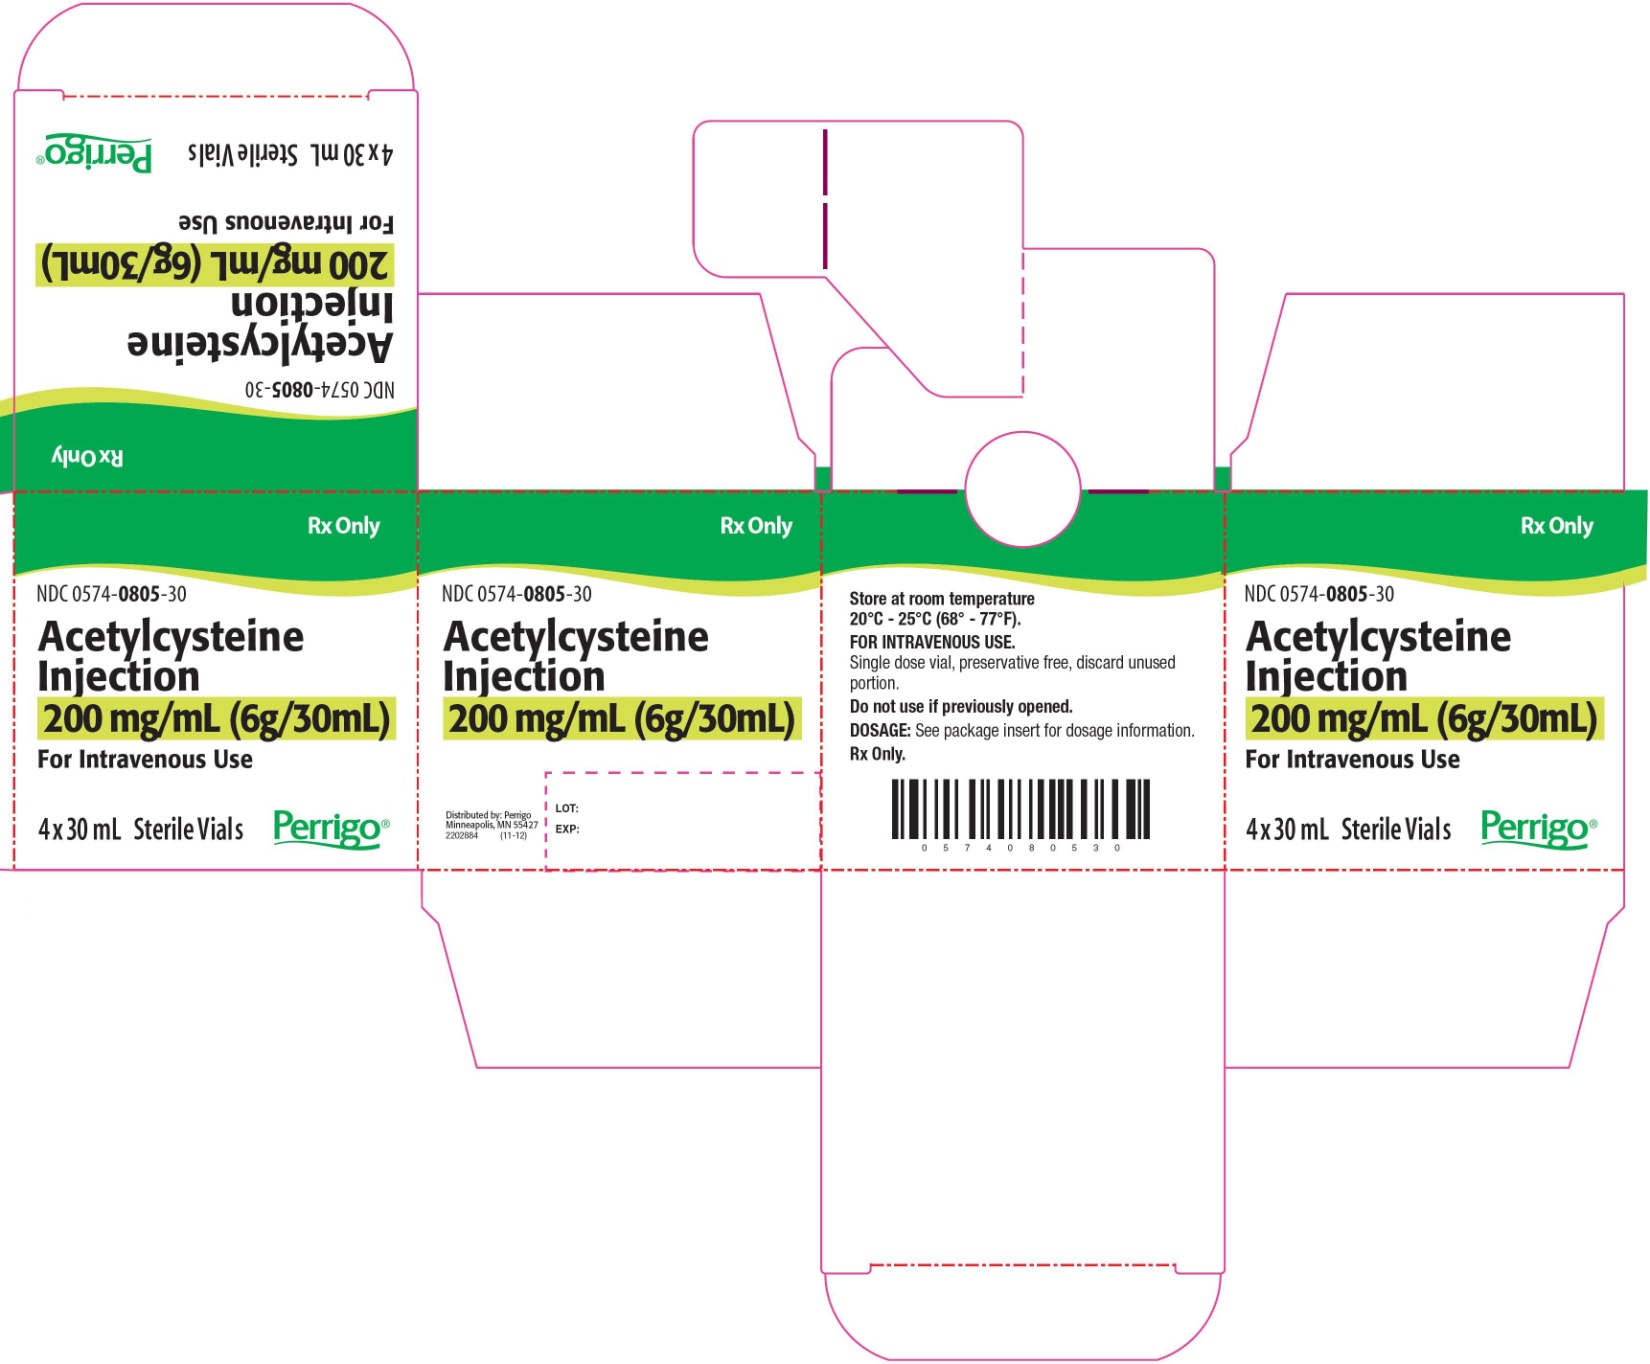 Acetylcysteine Injection Carton Image